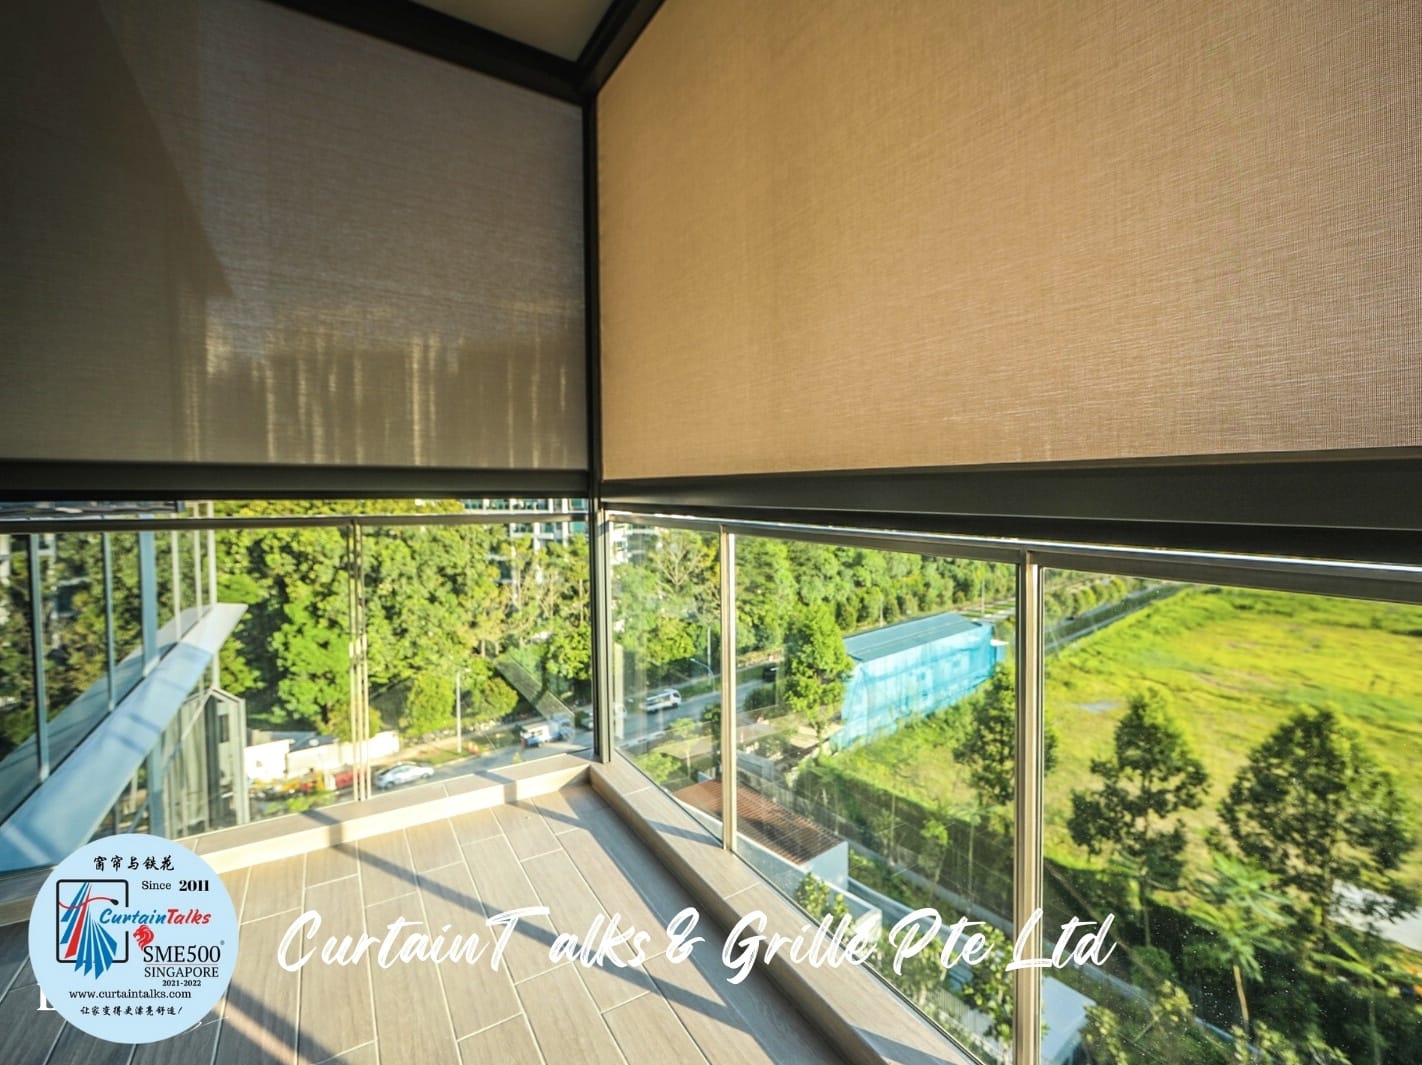 This is a Picture of Outdoor roller blinds-Singapore landed house-Sunrise drive